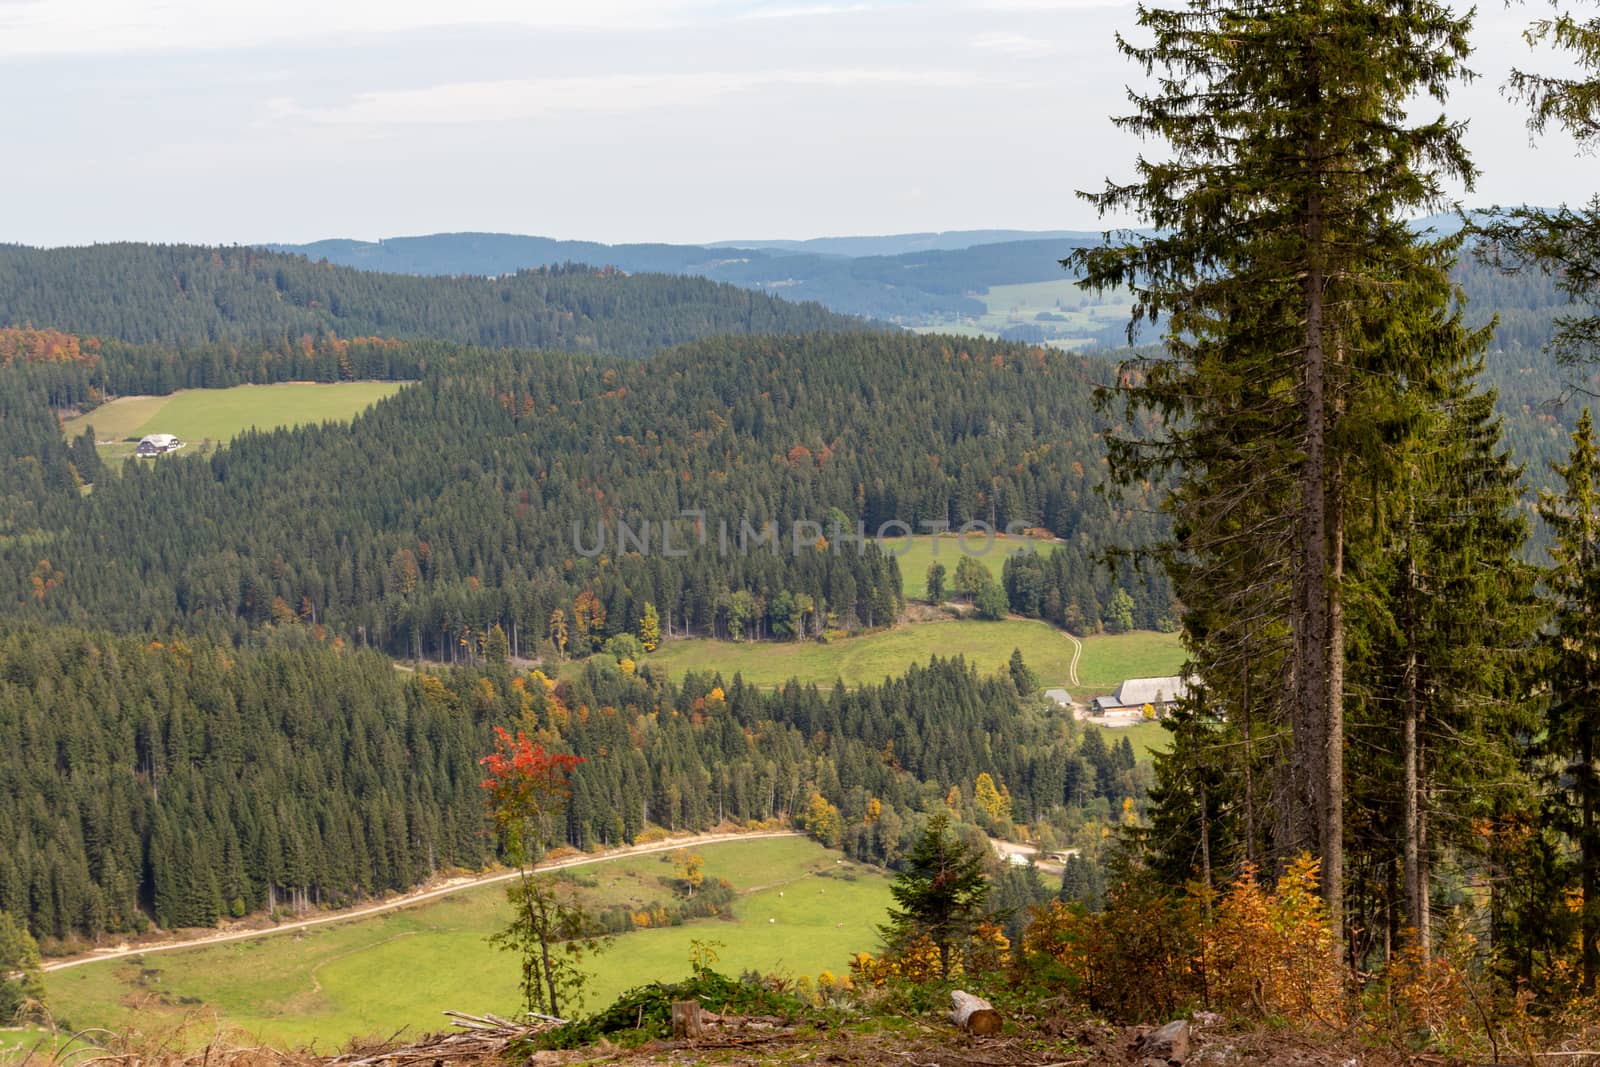 Scenic view at landscape nearby Feldberg, Black Forest in autumn by reinerc